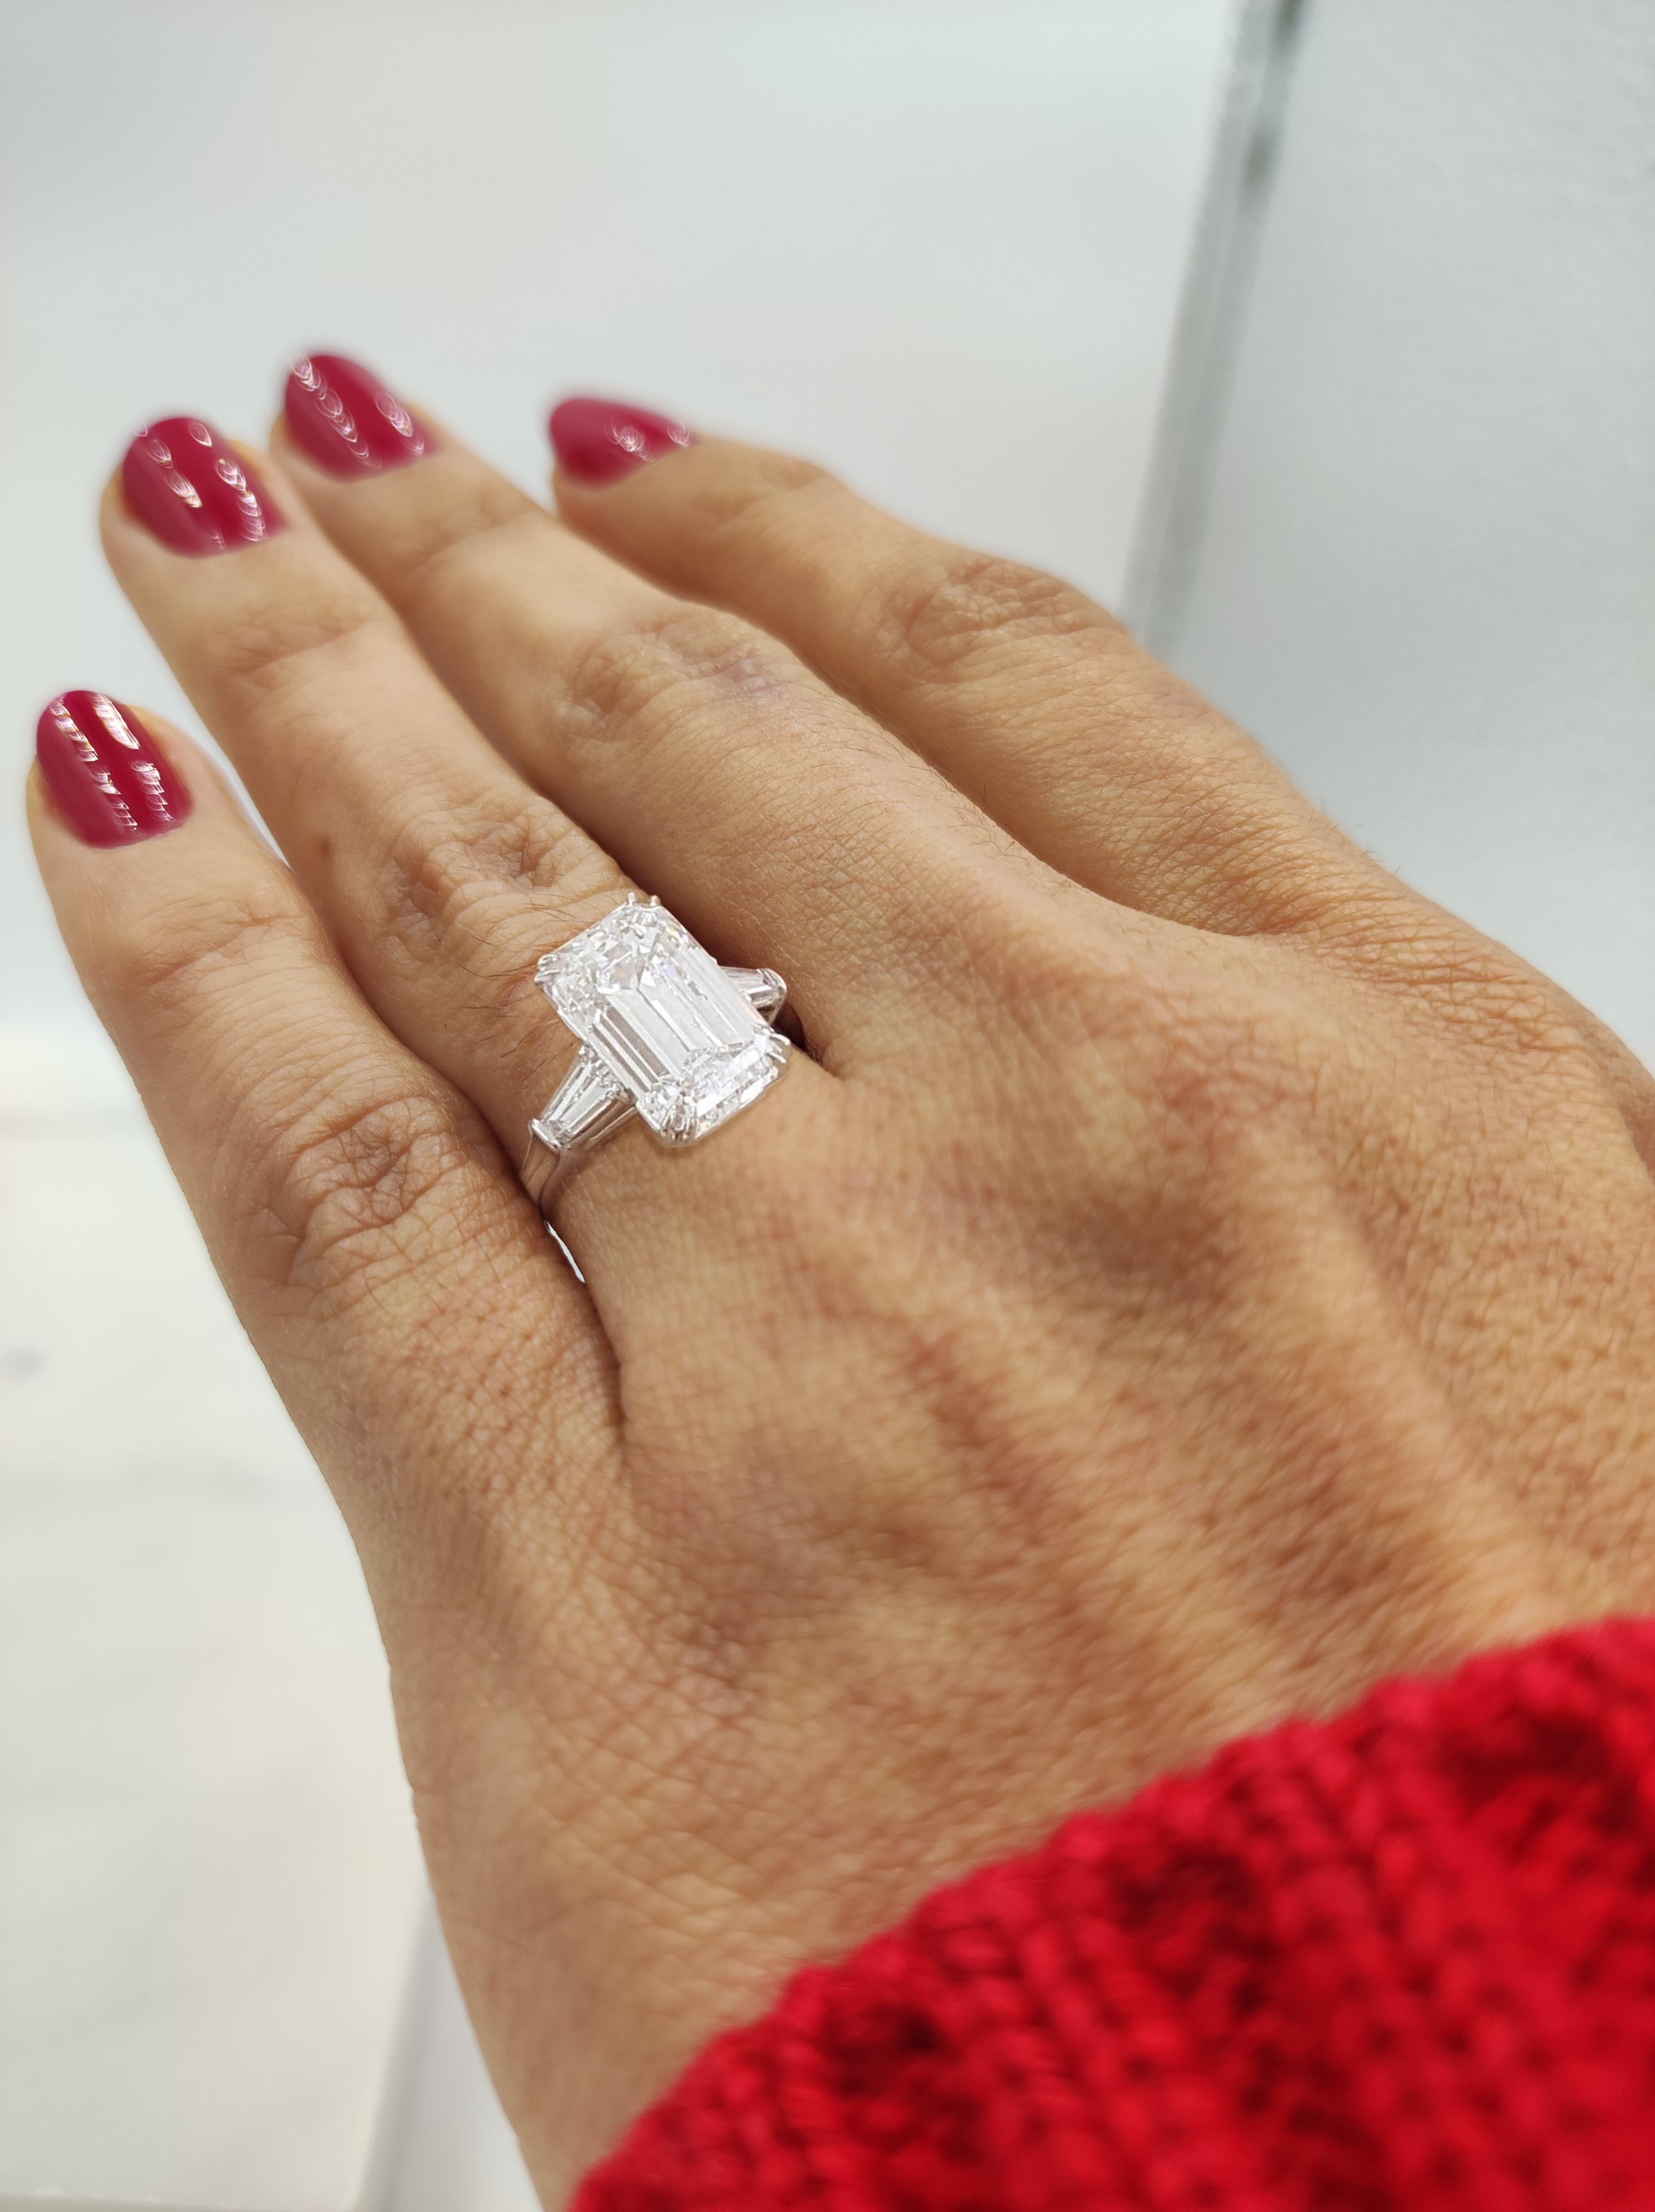 An exquisite 9 carat Emerald cut diamond with ideal ratio 
H color VS clarity
GIA certificate
